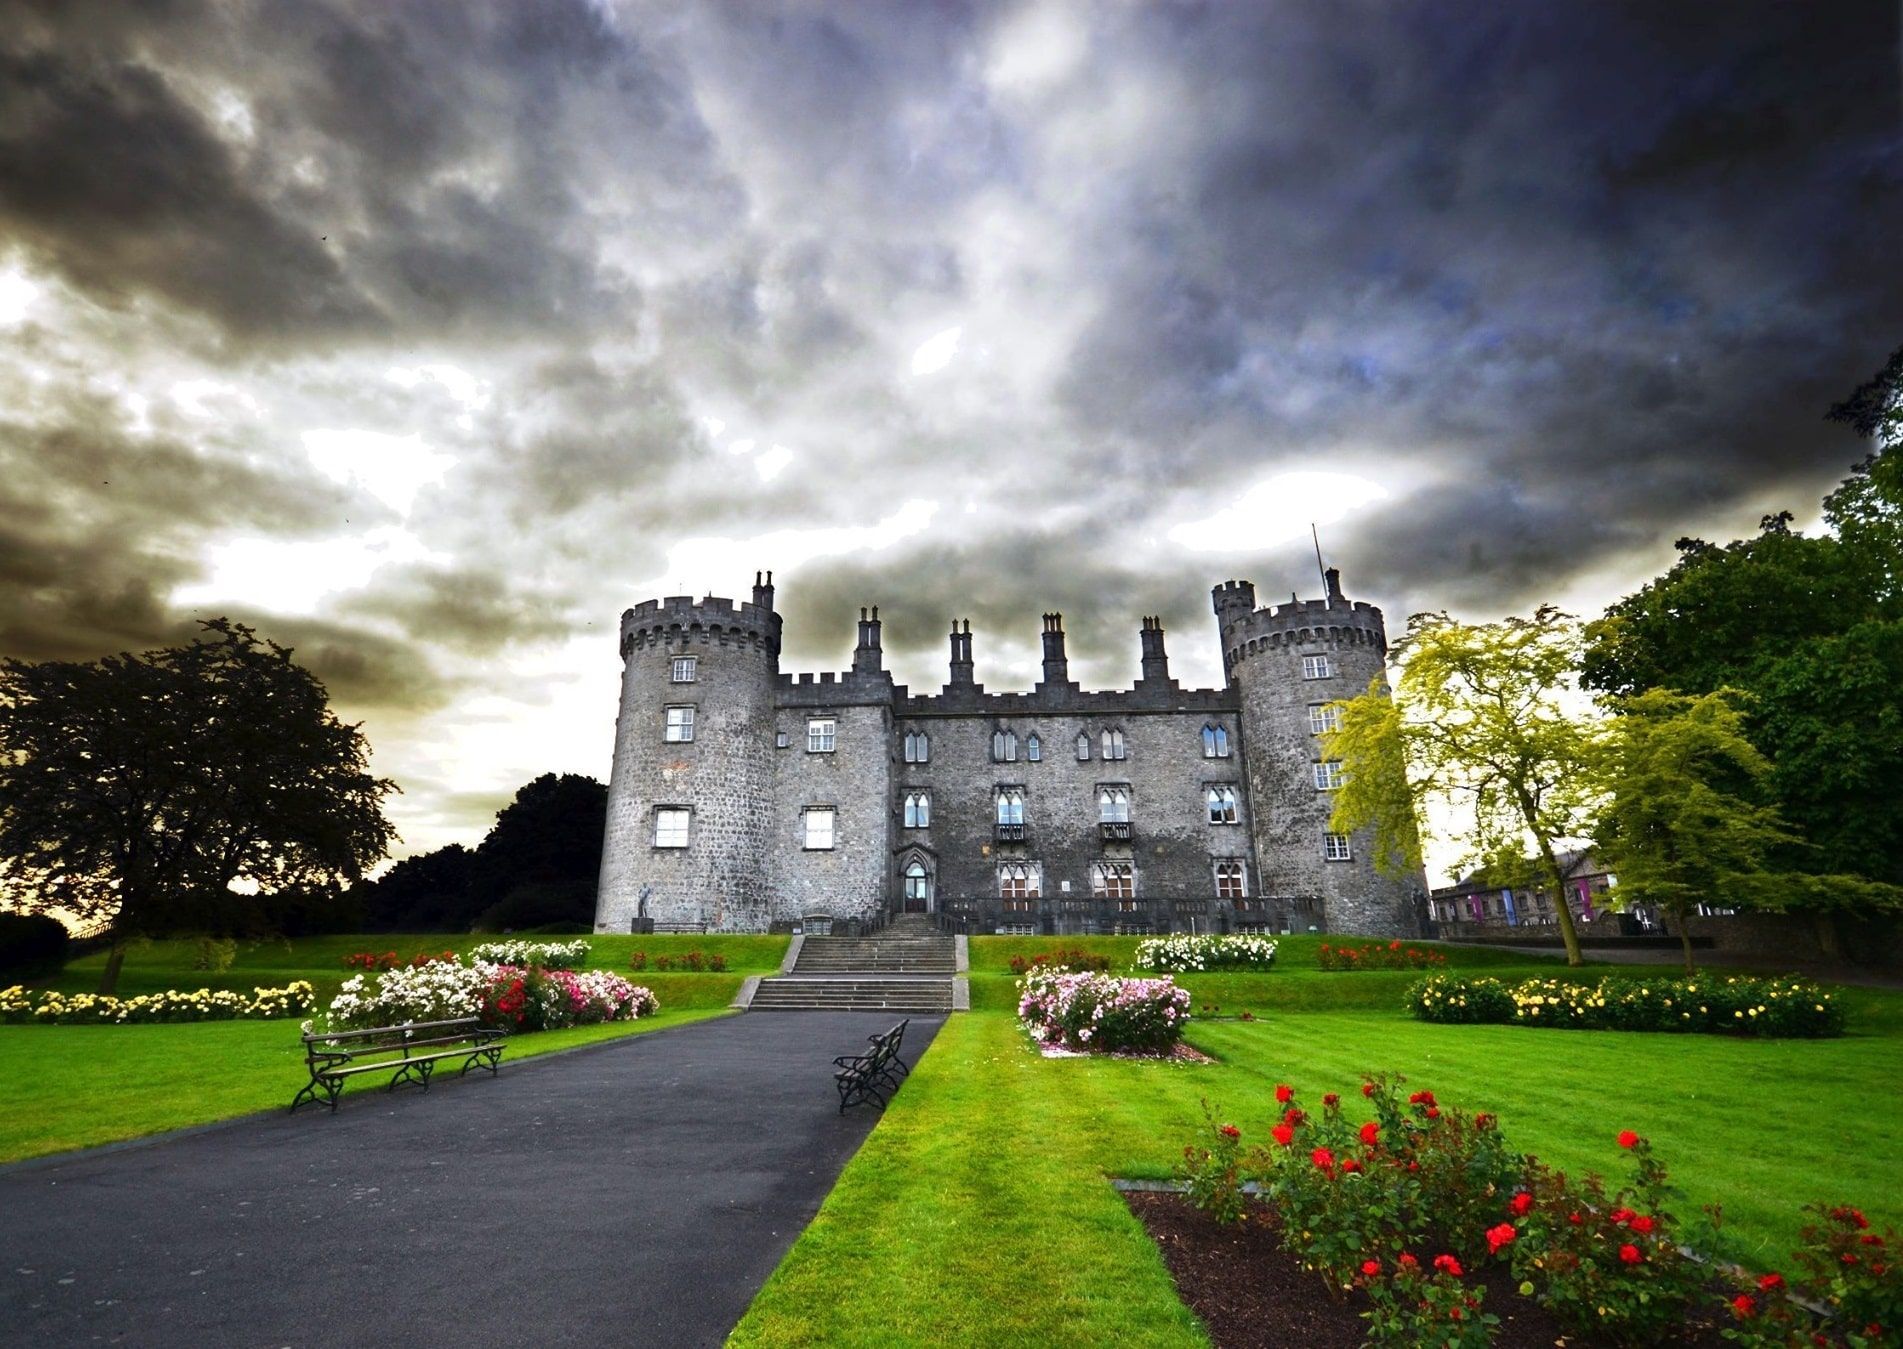 Exterior image of Kilkenny Castle from the Rosegarden with cloudy sky.